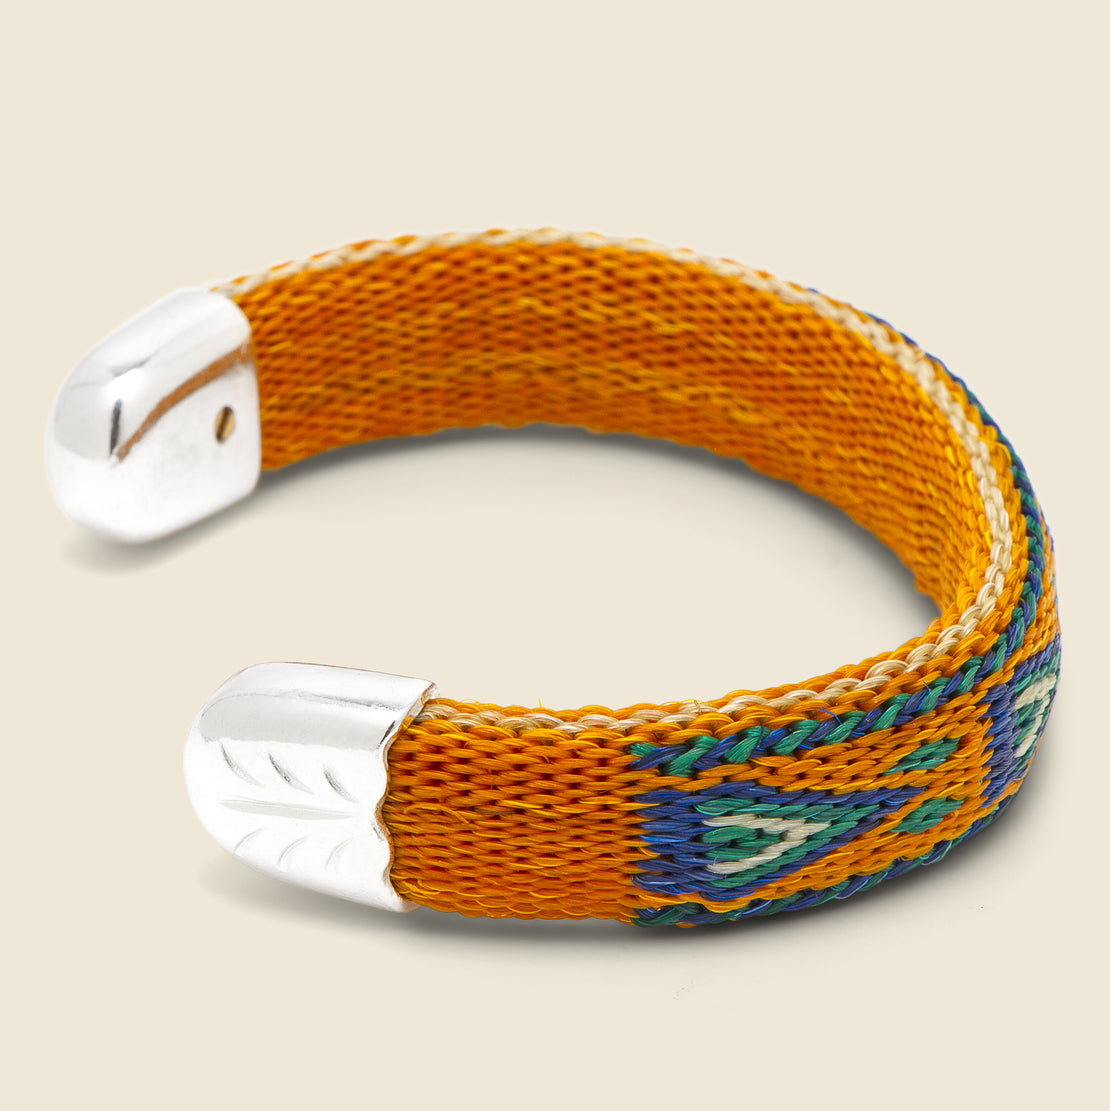 Bendable Horsehair Bracelet - Orange/Blue - Chamula - STAG Provisions - Accessories - Cuffs